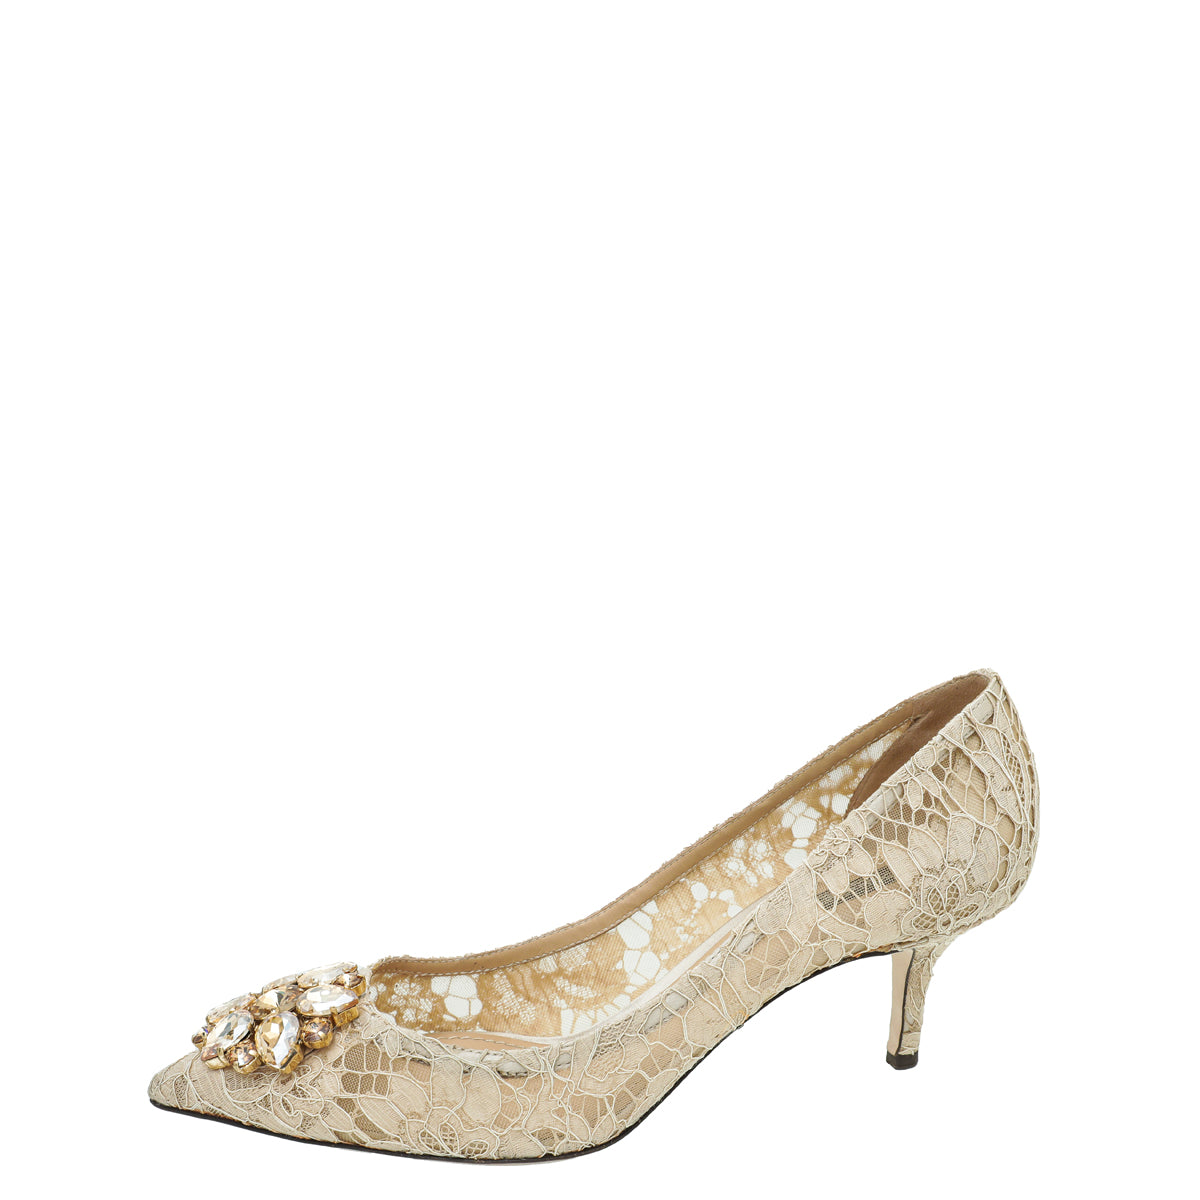 Dolce & Gabbana Nude Lace Bellucci Crystal Lace Pumps 39.5